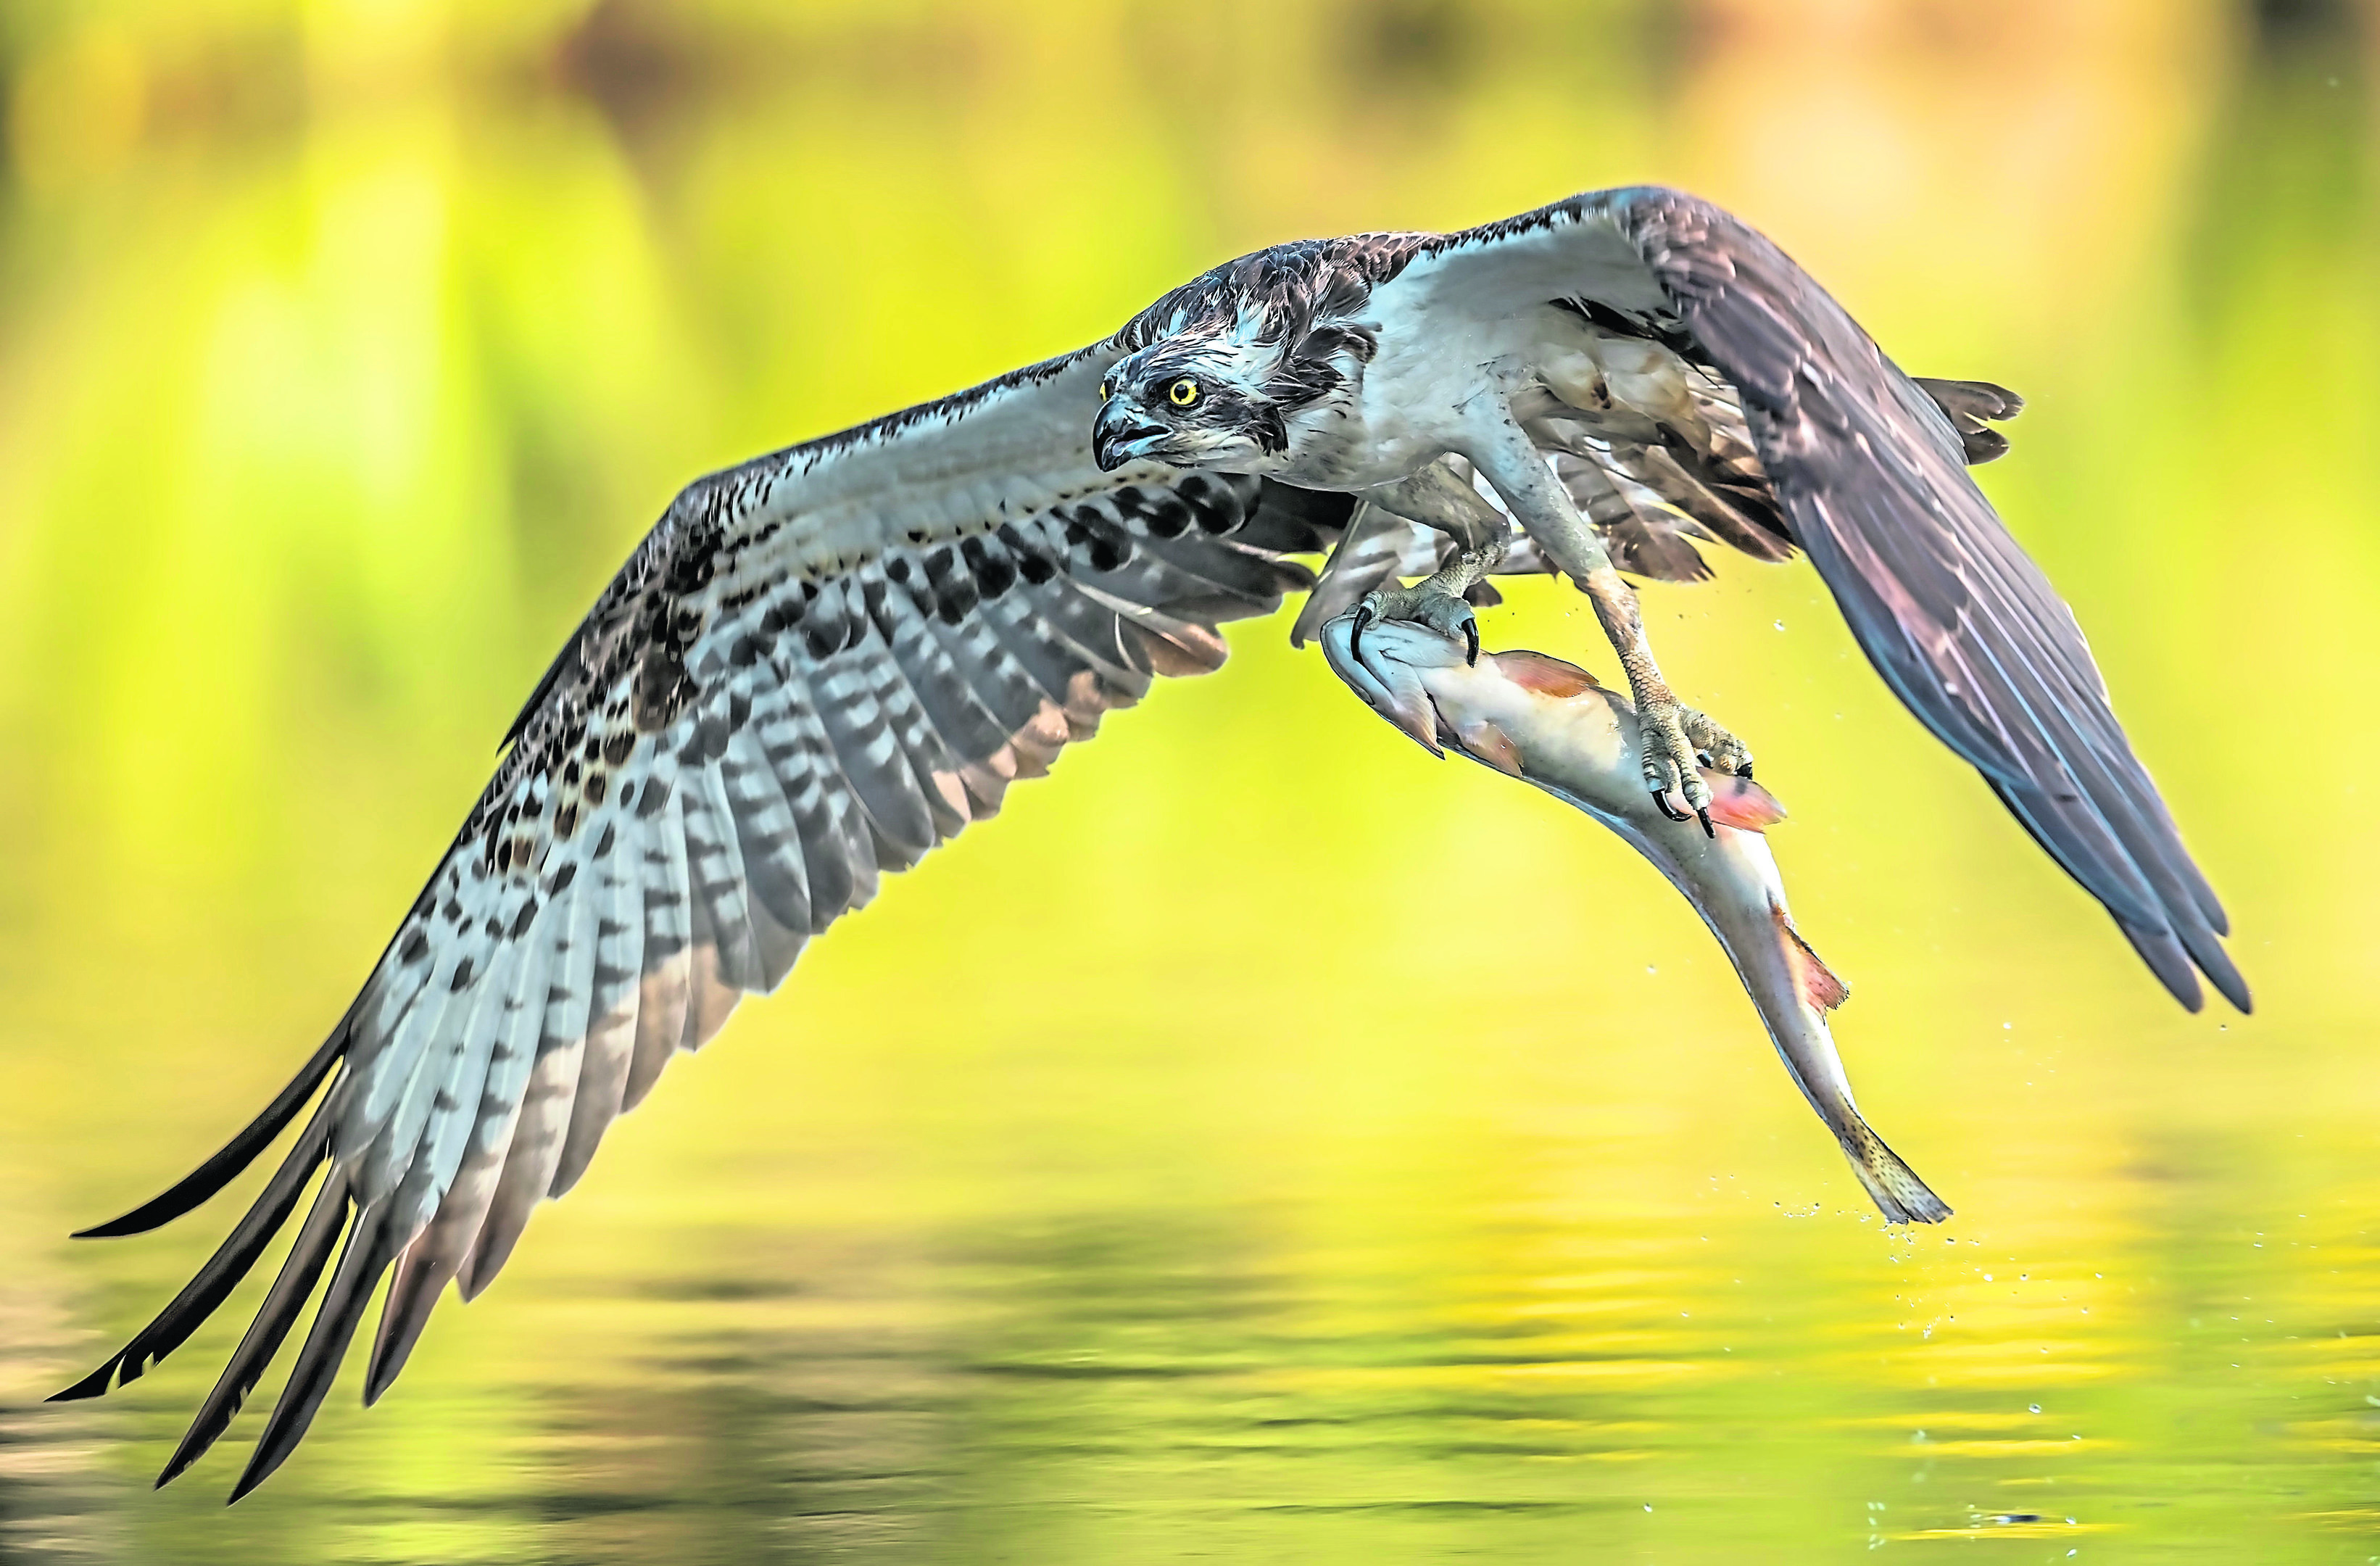 A majestic Osprey dives into the water to catch a fish in Aviemore.